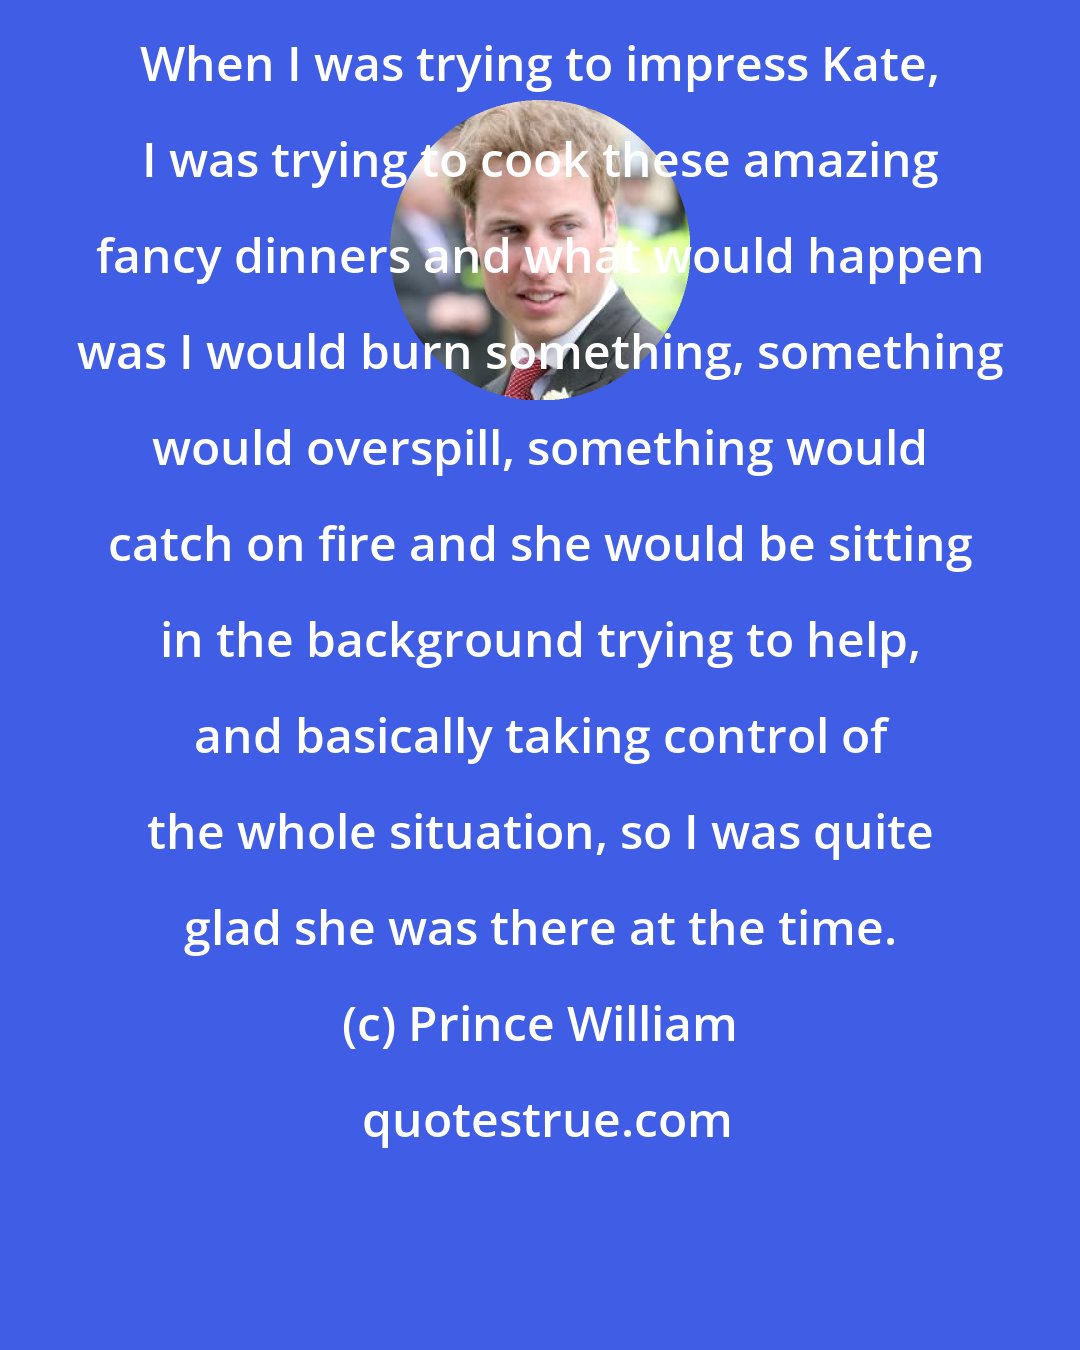 Prince William: When I was trying to impress Kate, I was trying to cook these amazing fancy dinners and what would happen was I would burn something, something would overspill, something would catch on fire and she would be sitting in the background trying to help, and basically taking control of the whole situation, so I was quite glad she was there at the time.